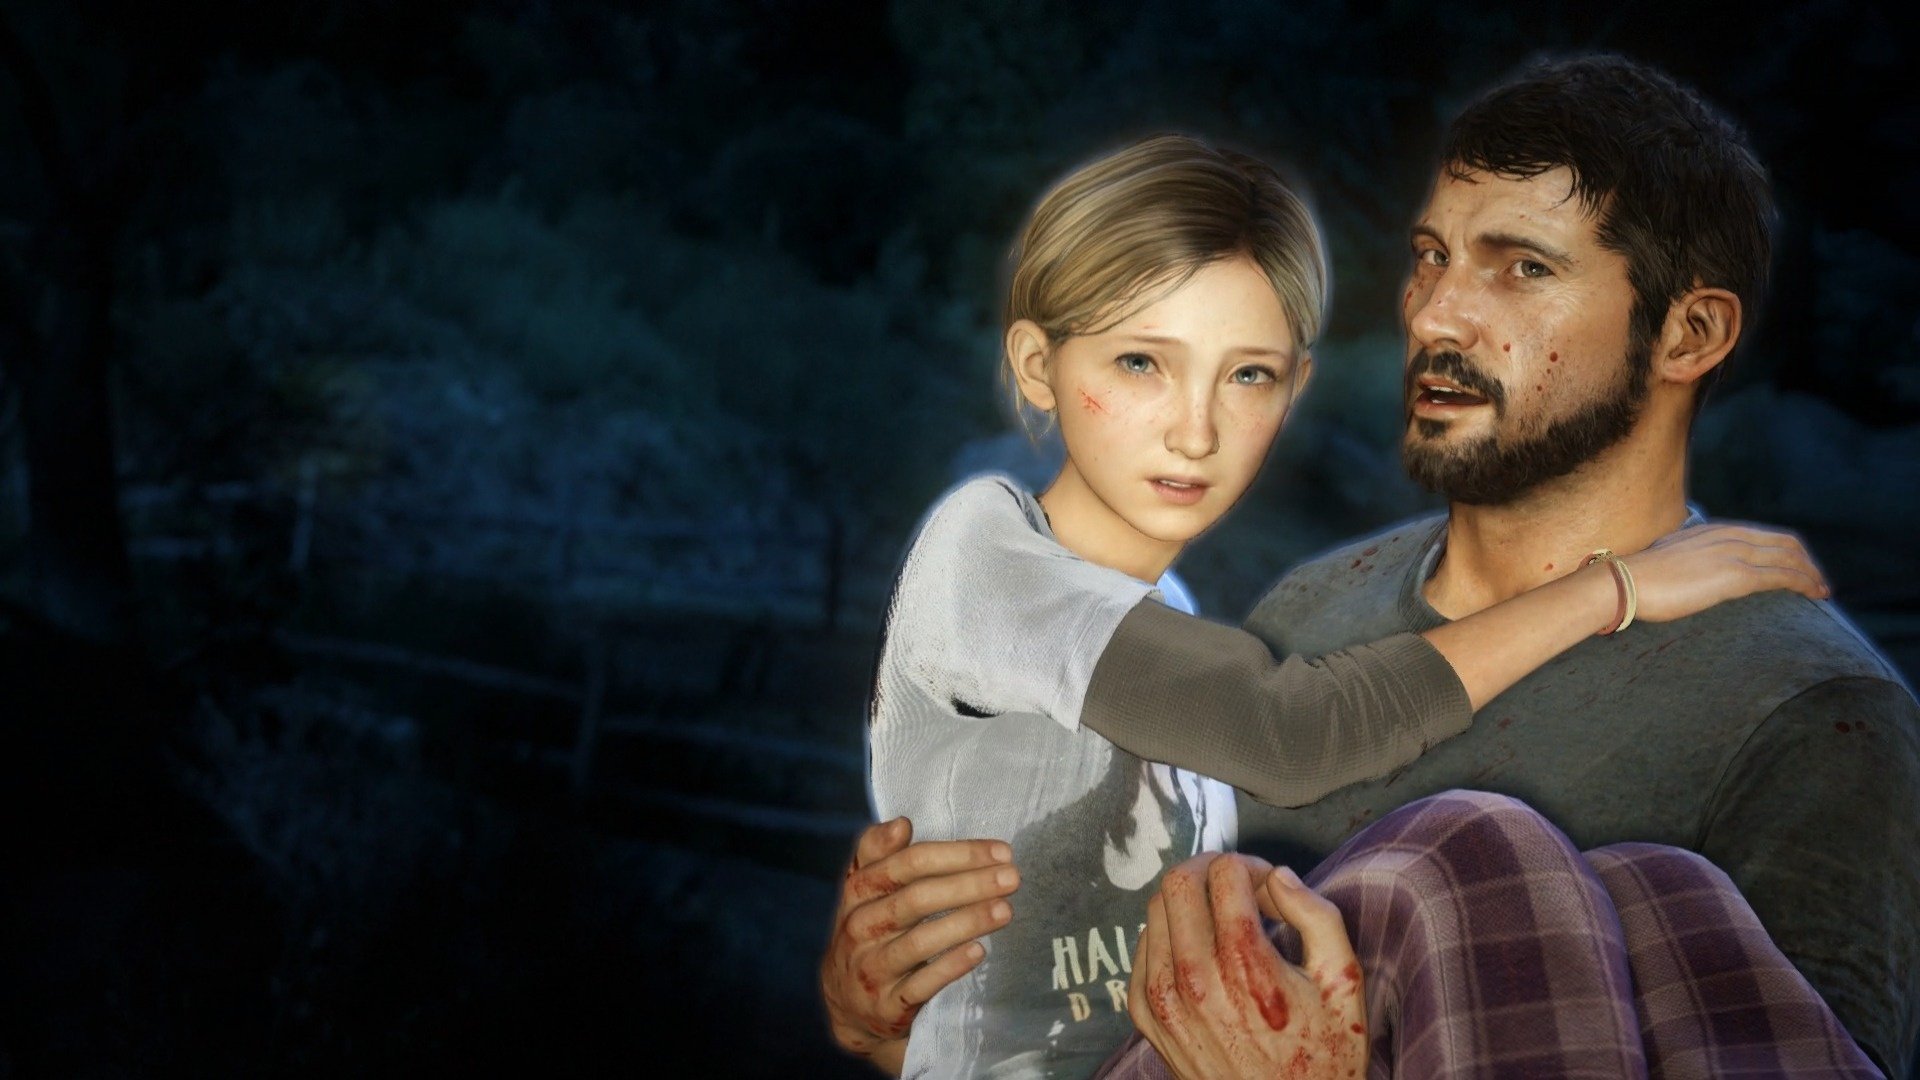 the last of us 2 story download